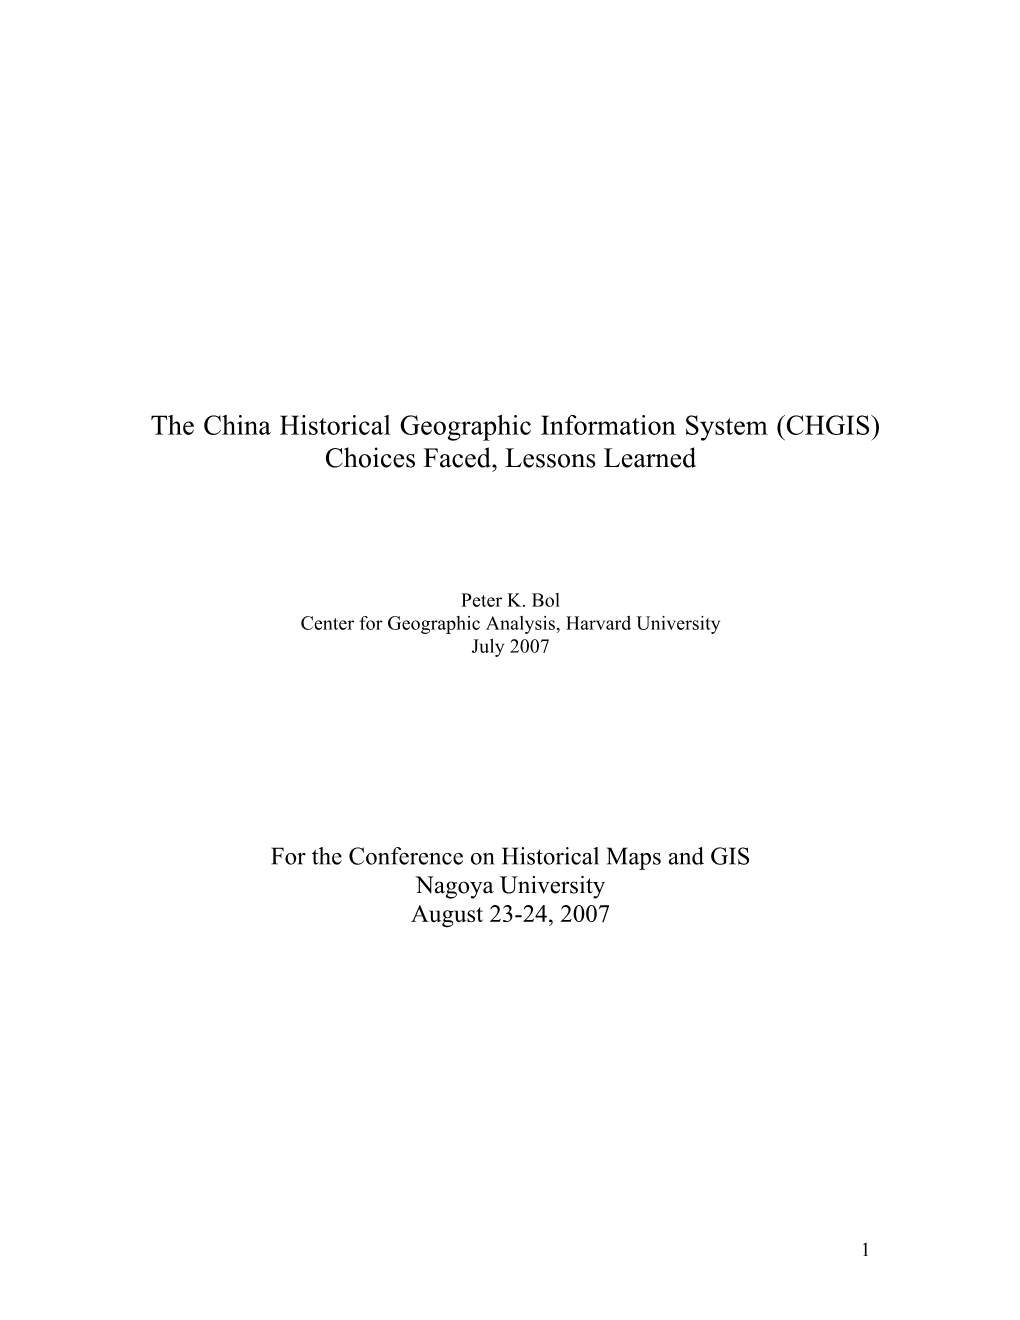 The China Historical Geographic Information System (CHGIS) Choices Faced, Lessons Learned